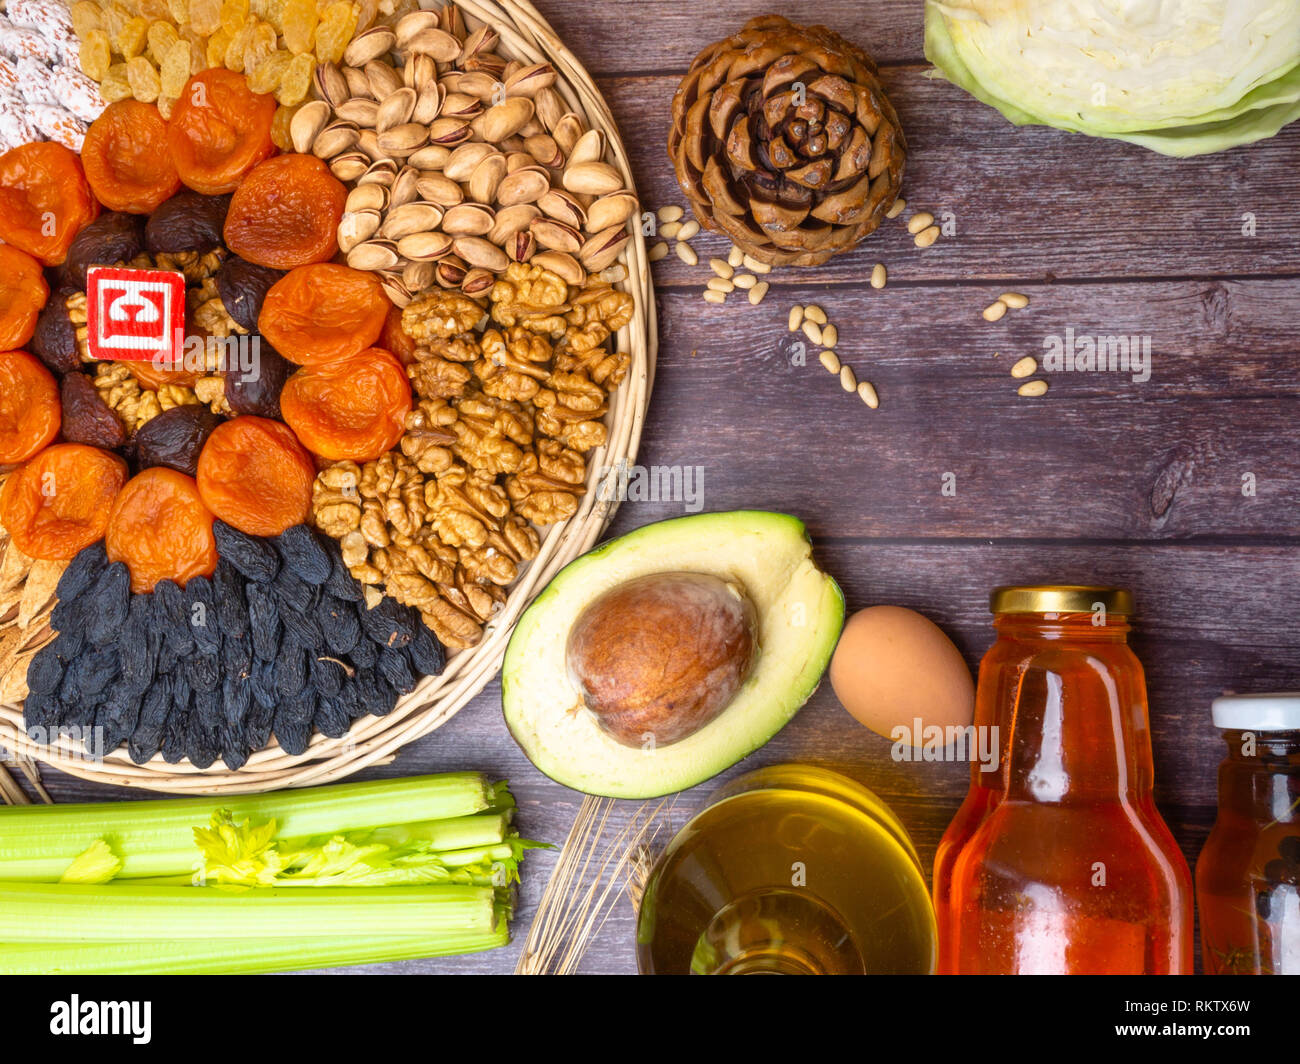 Foods containing vitamin E on wooden surface, copy space Stock Photo